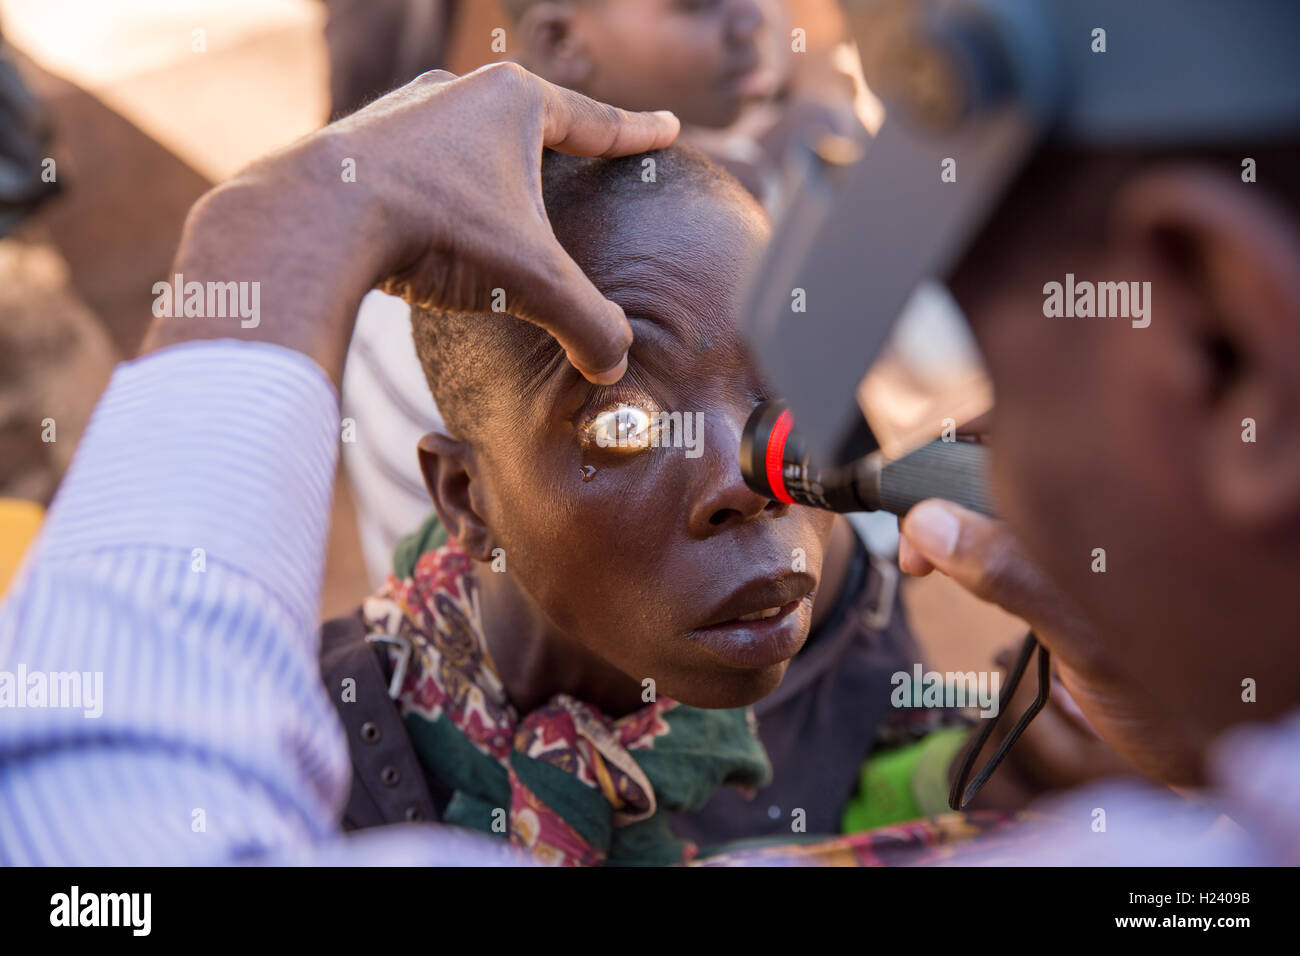 Ribaue Hospital,  Ribaue, Nampula Province, Mozambique, August 2015: Laurinda Diago having having her eyes checked by Ophthamologist Dr Anselmo Vilanculo. Photo by Mike Goldwater Stock Photo